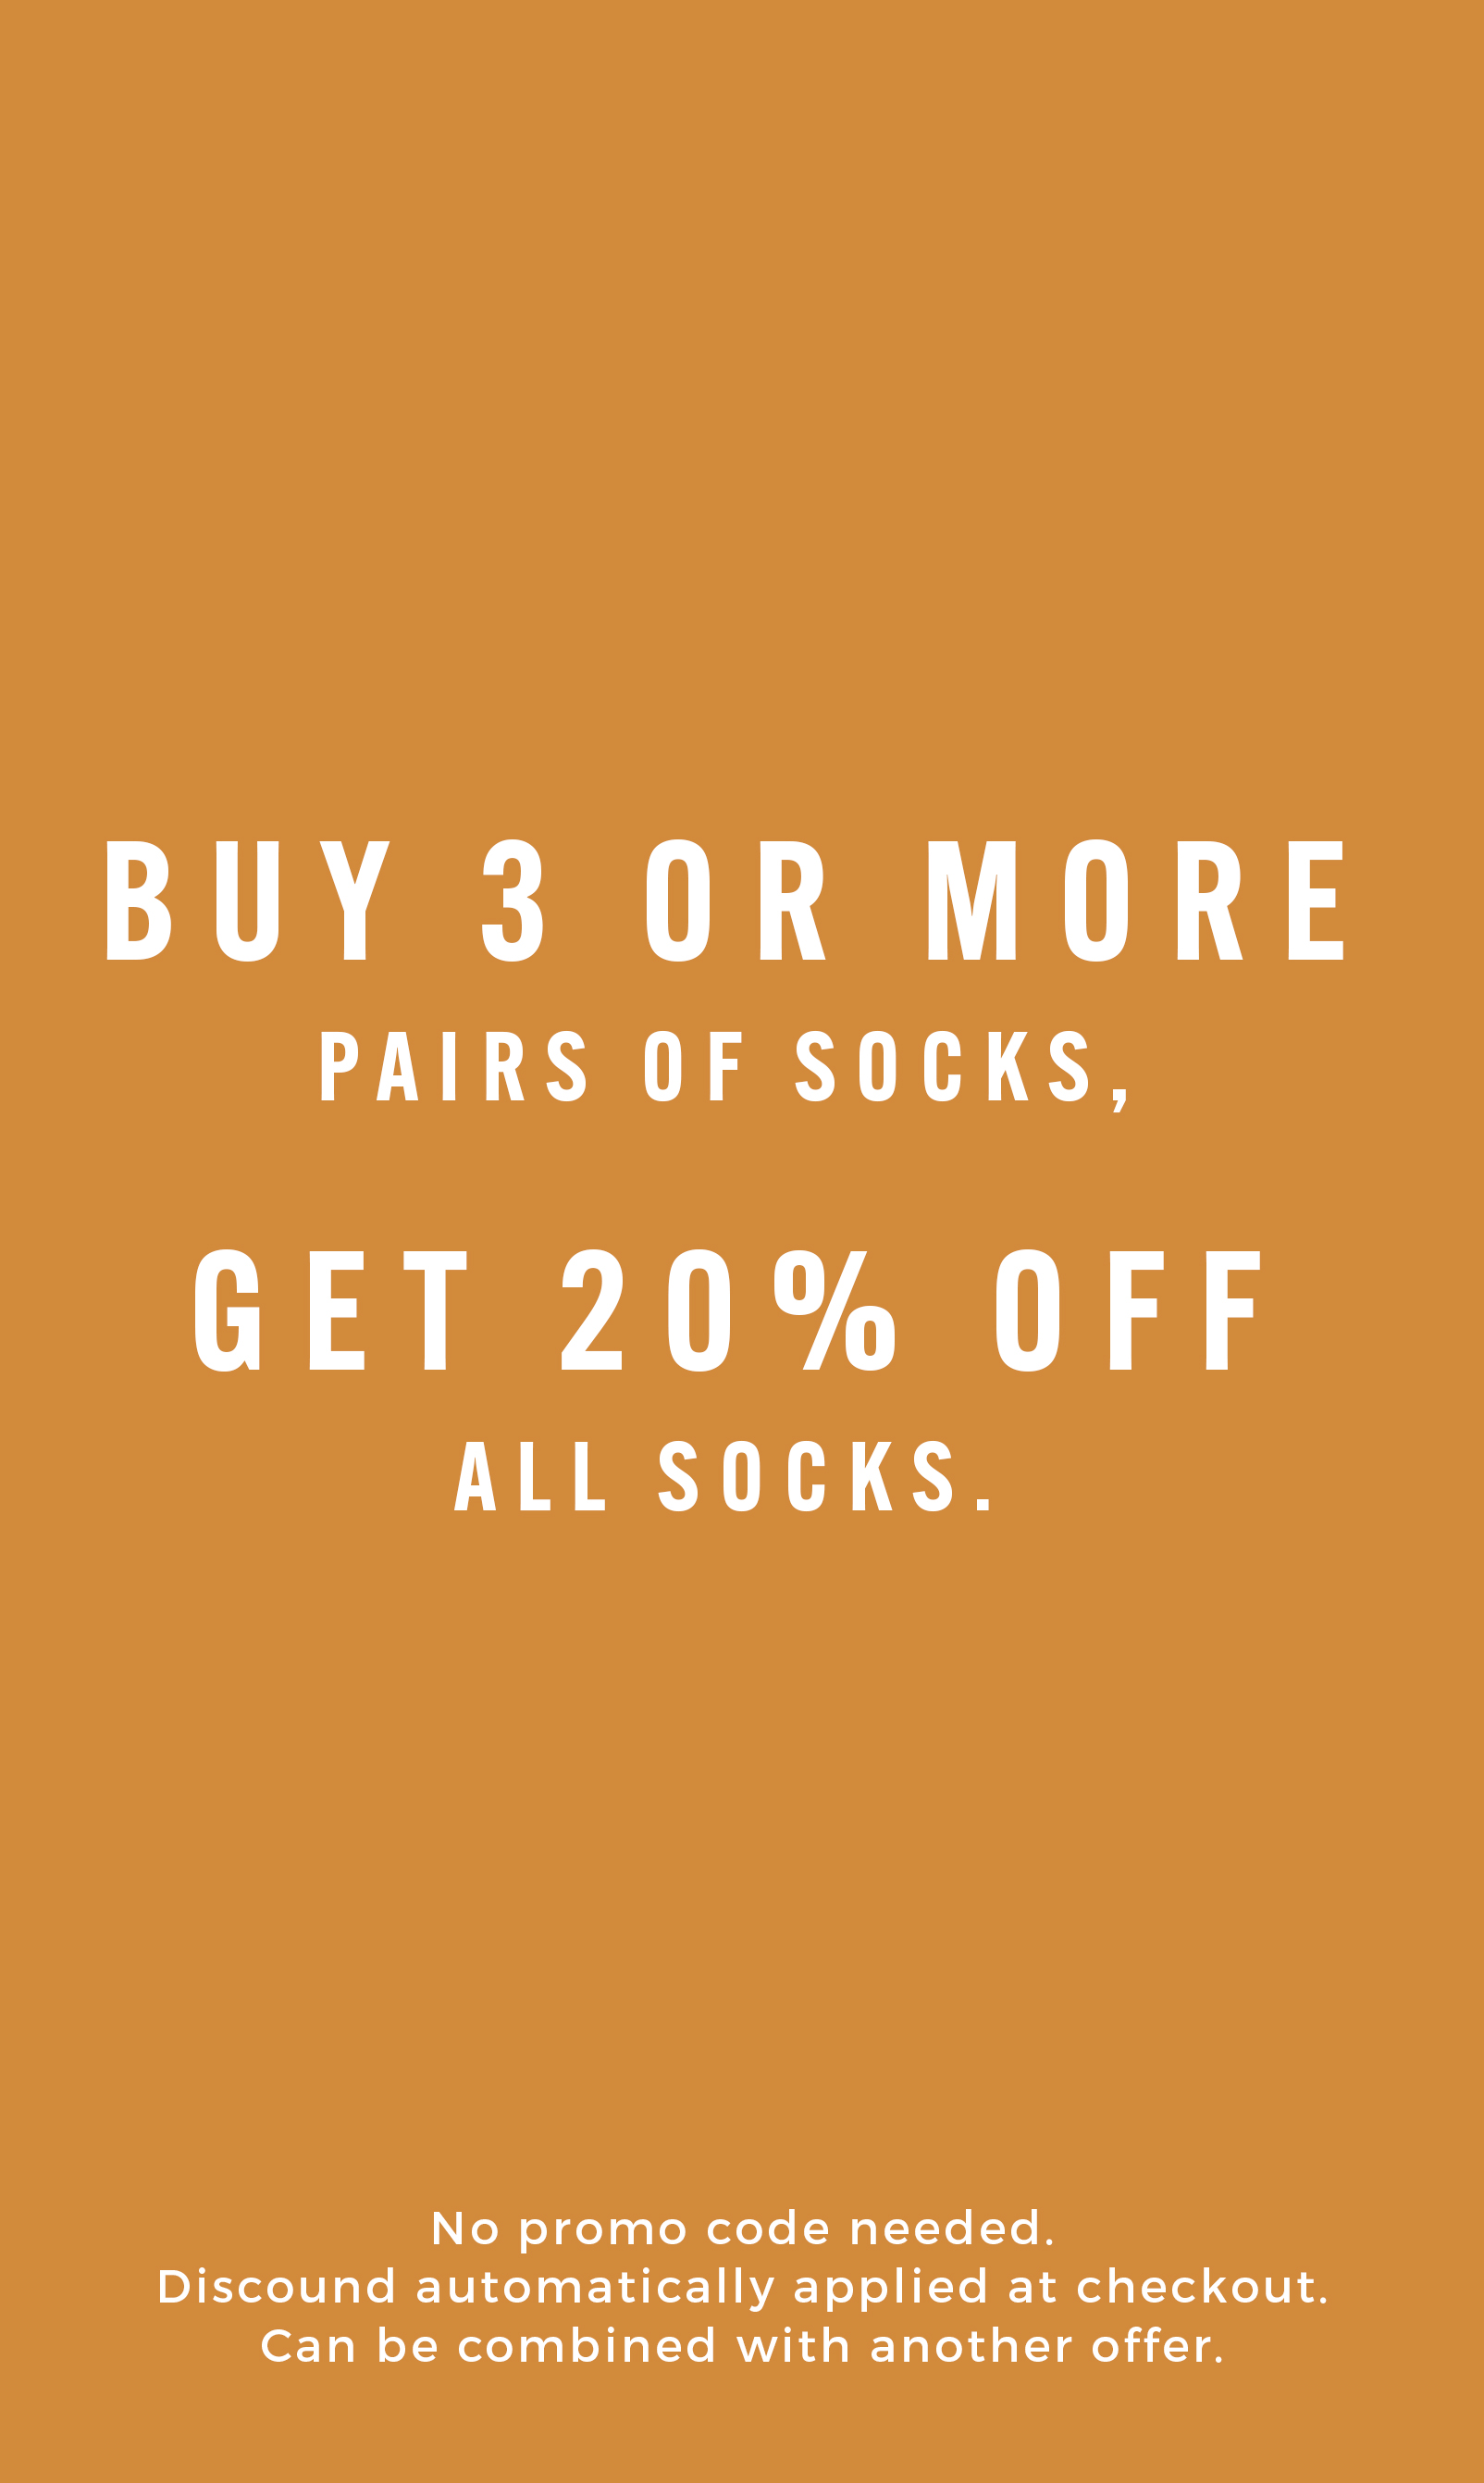 Clearance Men's Shoes category. Buy 3 or more pairs of socks, get 20% off all socks. No promo code needed. The image features a pair of Florsheim socks. 